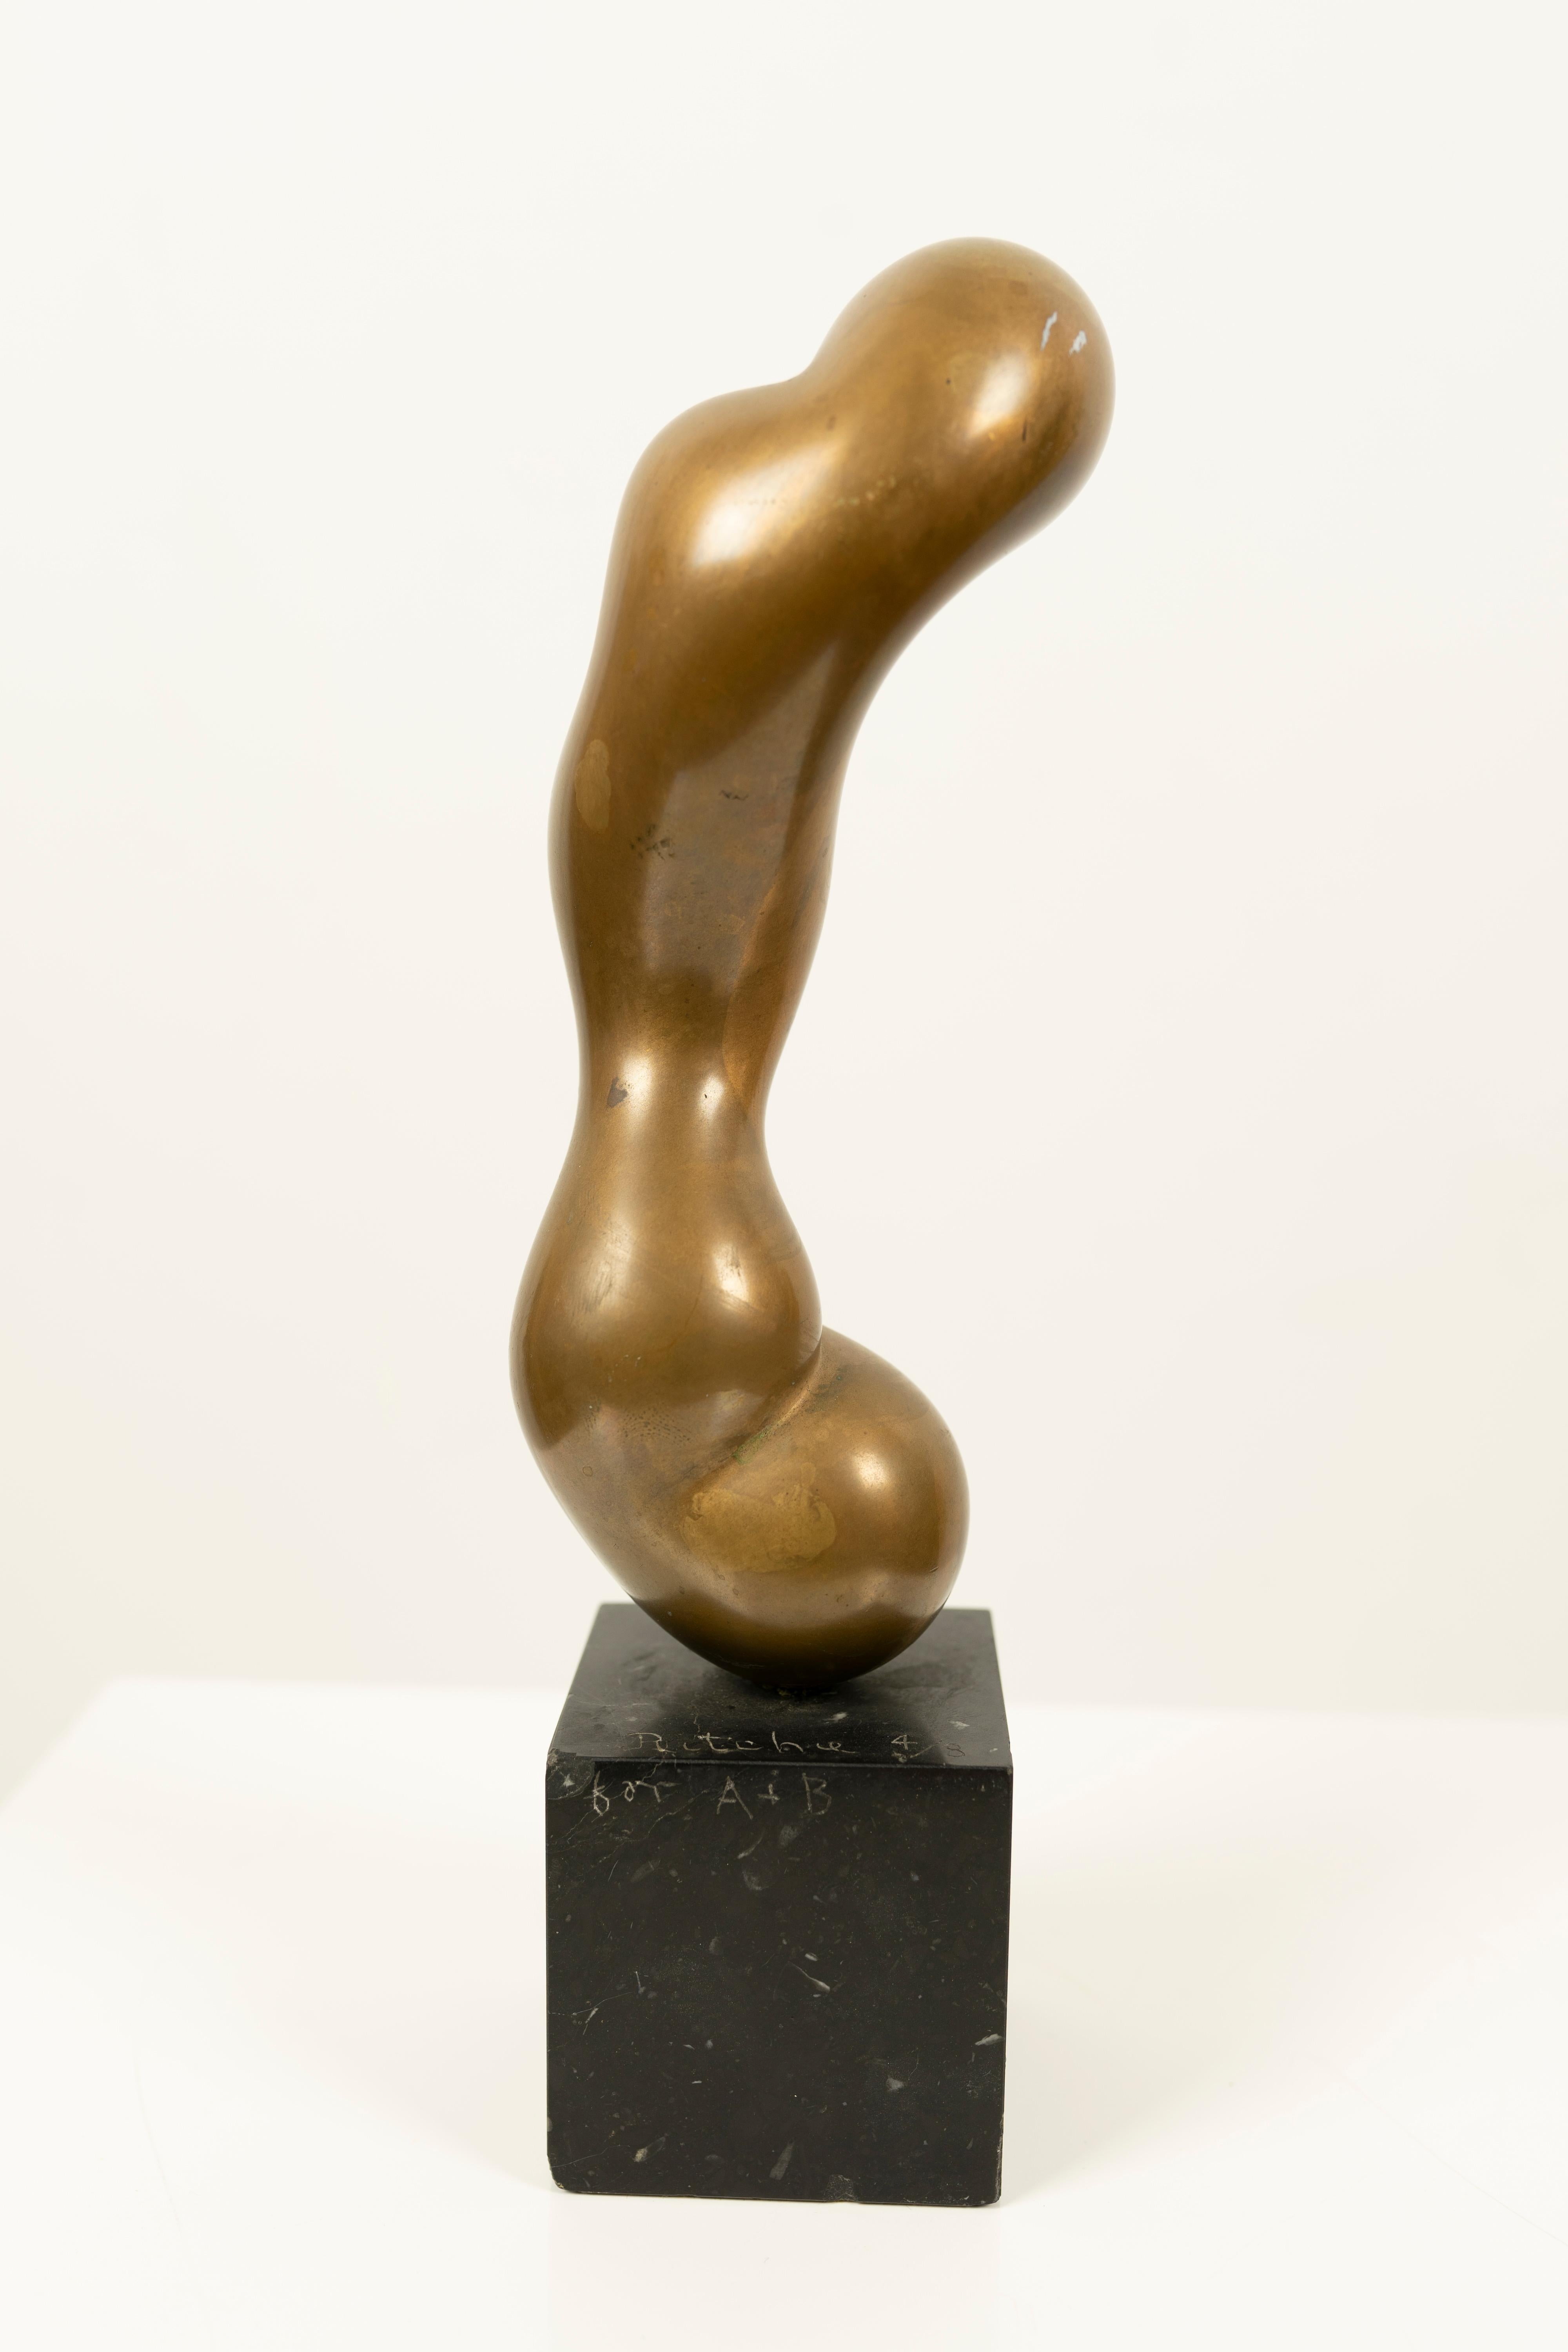 Amorphic sinuous bronze abstract figural sculpture. Bronze itself is 6 inches in height. Perfect desktop height. Hand signed and numbered 4/8. this one has a Kenny Scharf sort of Pop Art feel to it and is all rounded surfaces.

James Edward Ritchie,